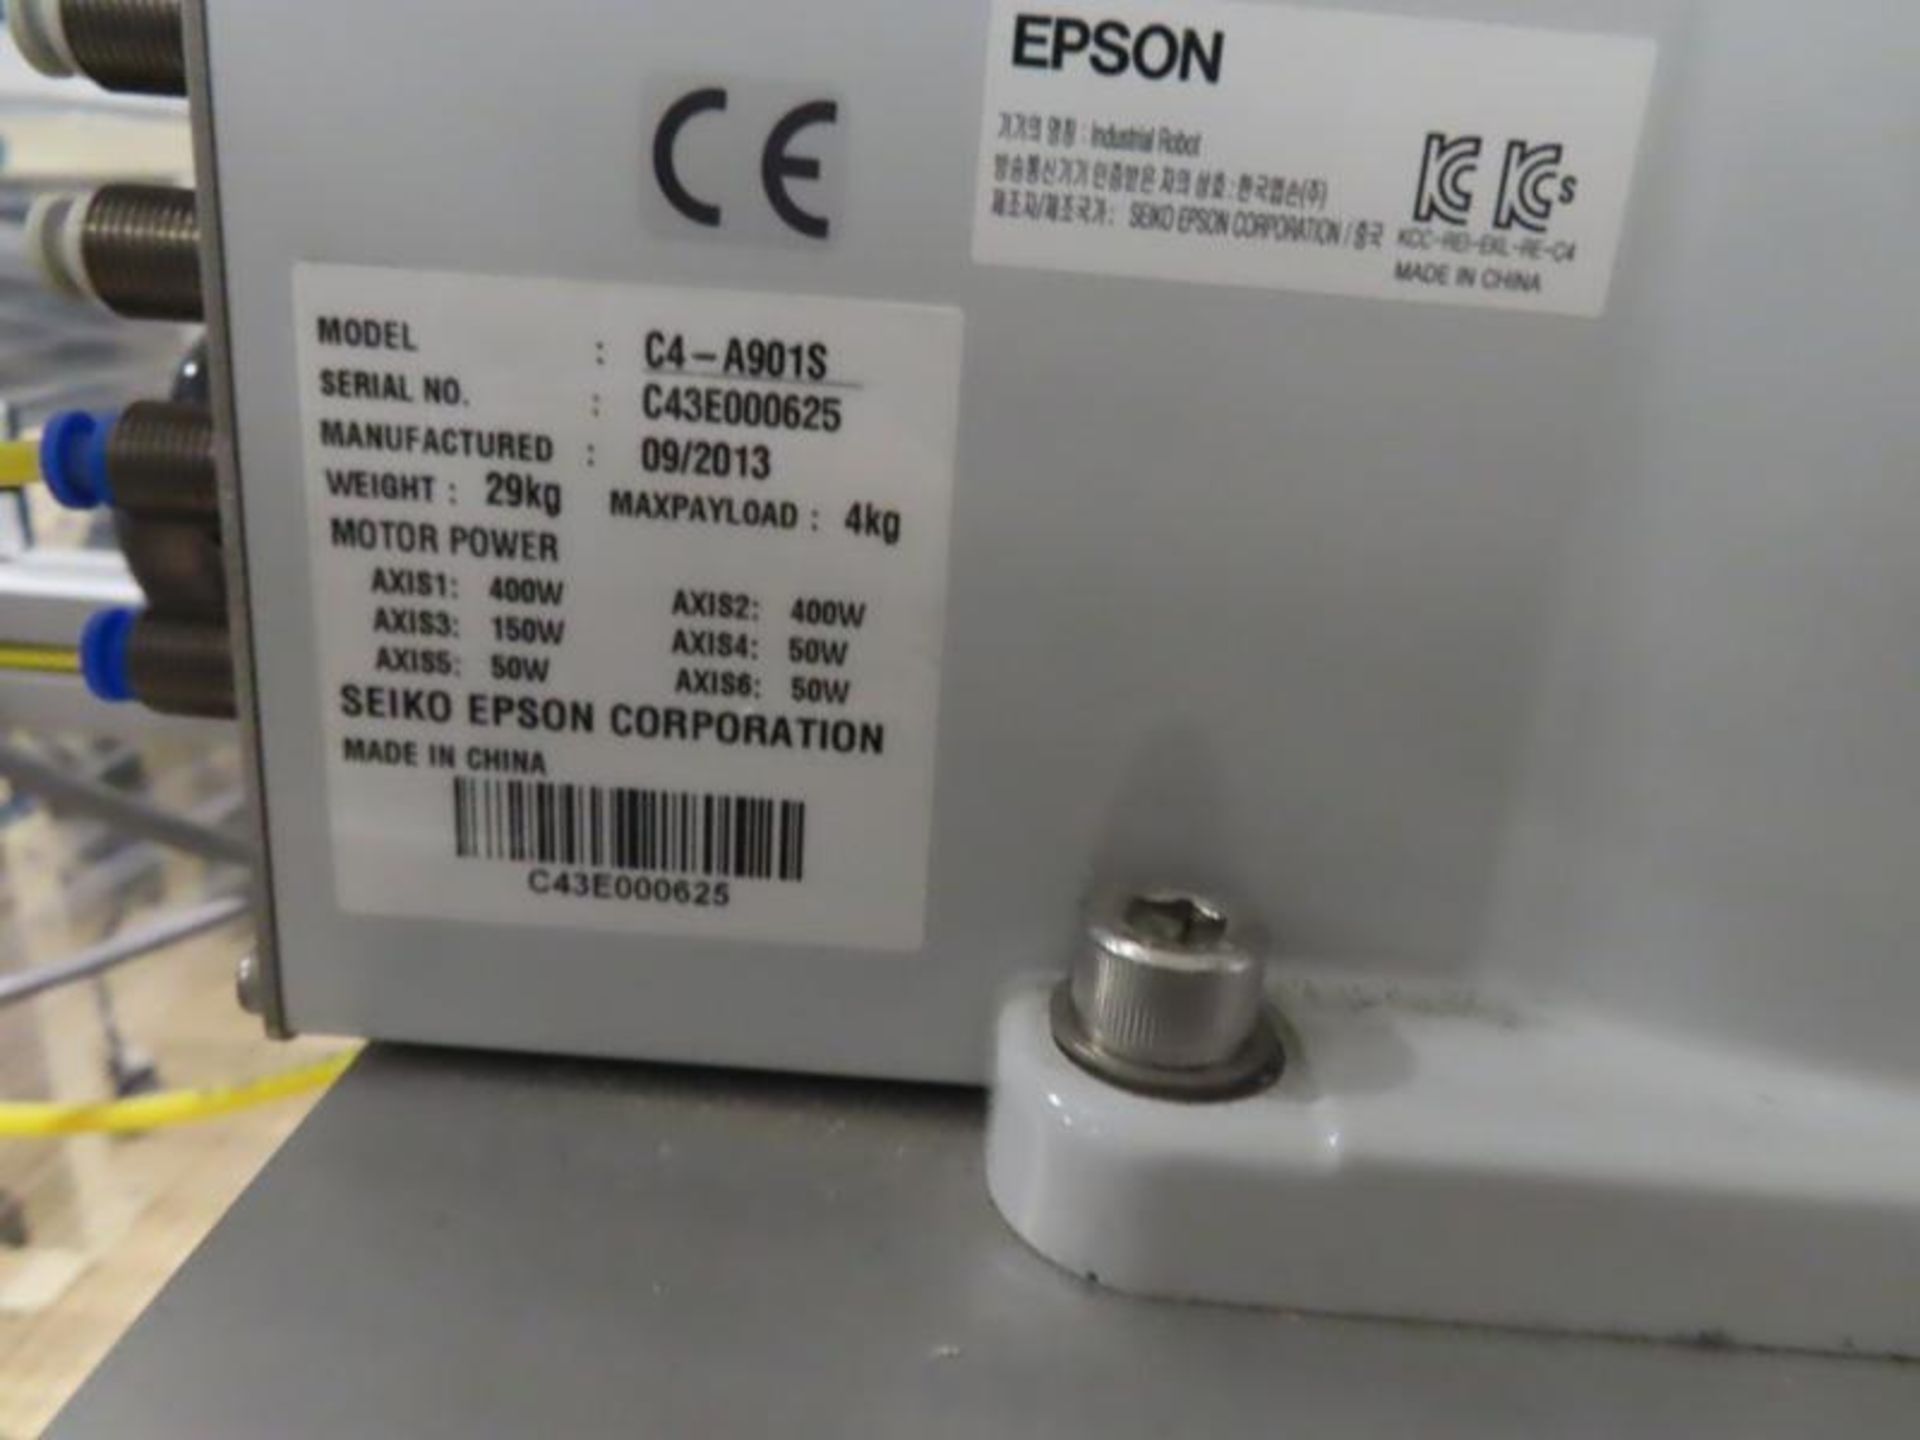 2013 Epson Model C4-A901S Robot with Safety Cell (approx 4.5ft x 6ft) - Image 3 of 4